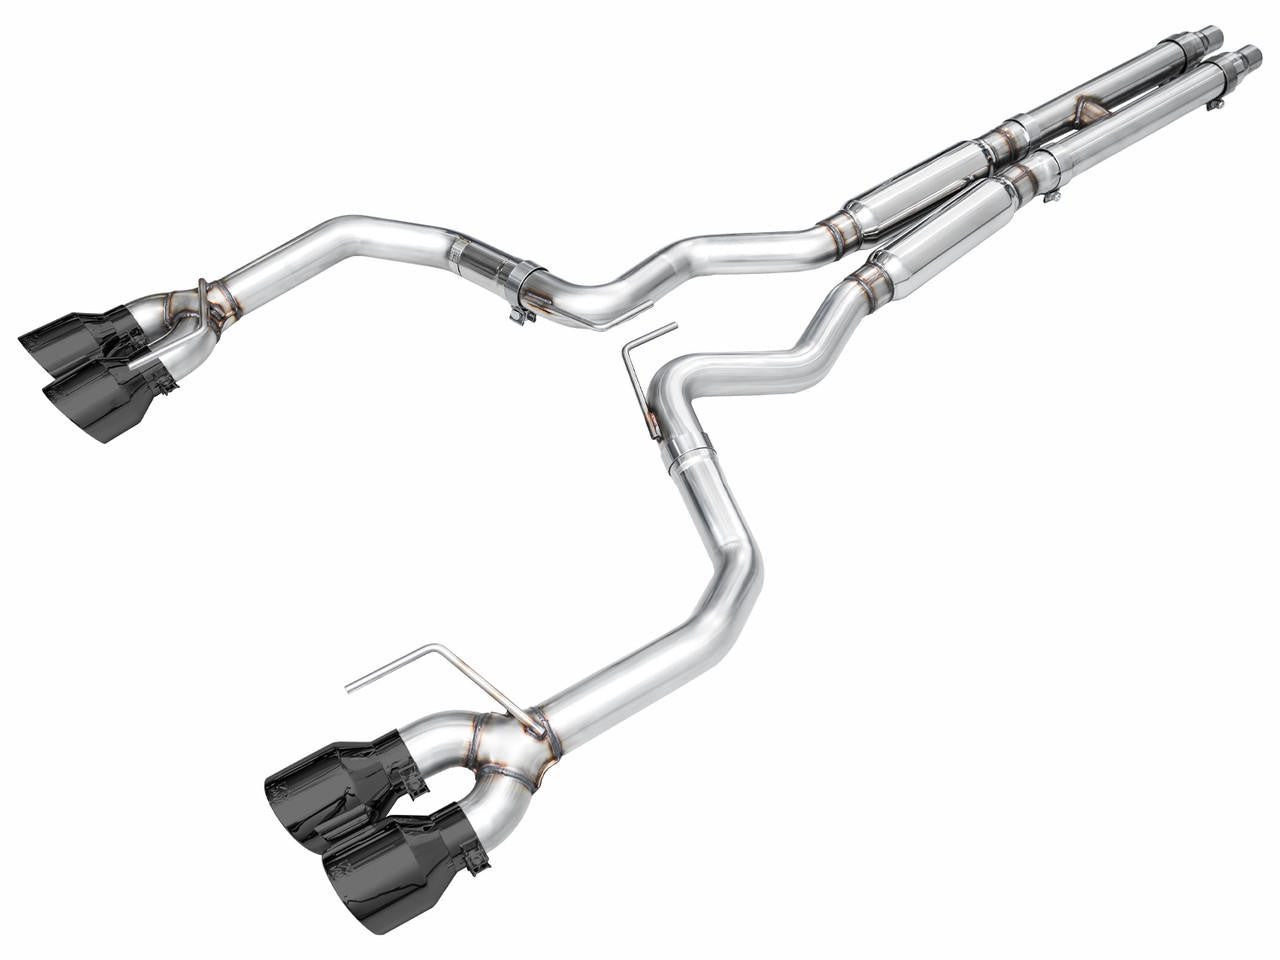 AWE Tuning AWE Track Edition Exhaust for S650 Mustang Dark Horse - Quad Diamond Black Tips 3020-43375 